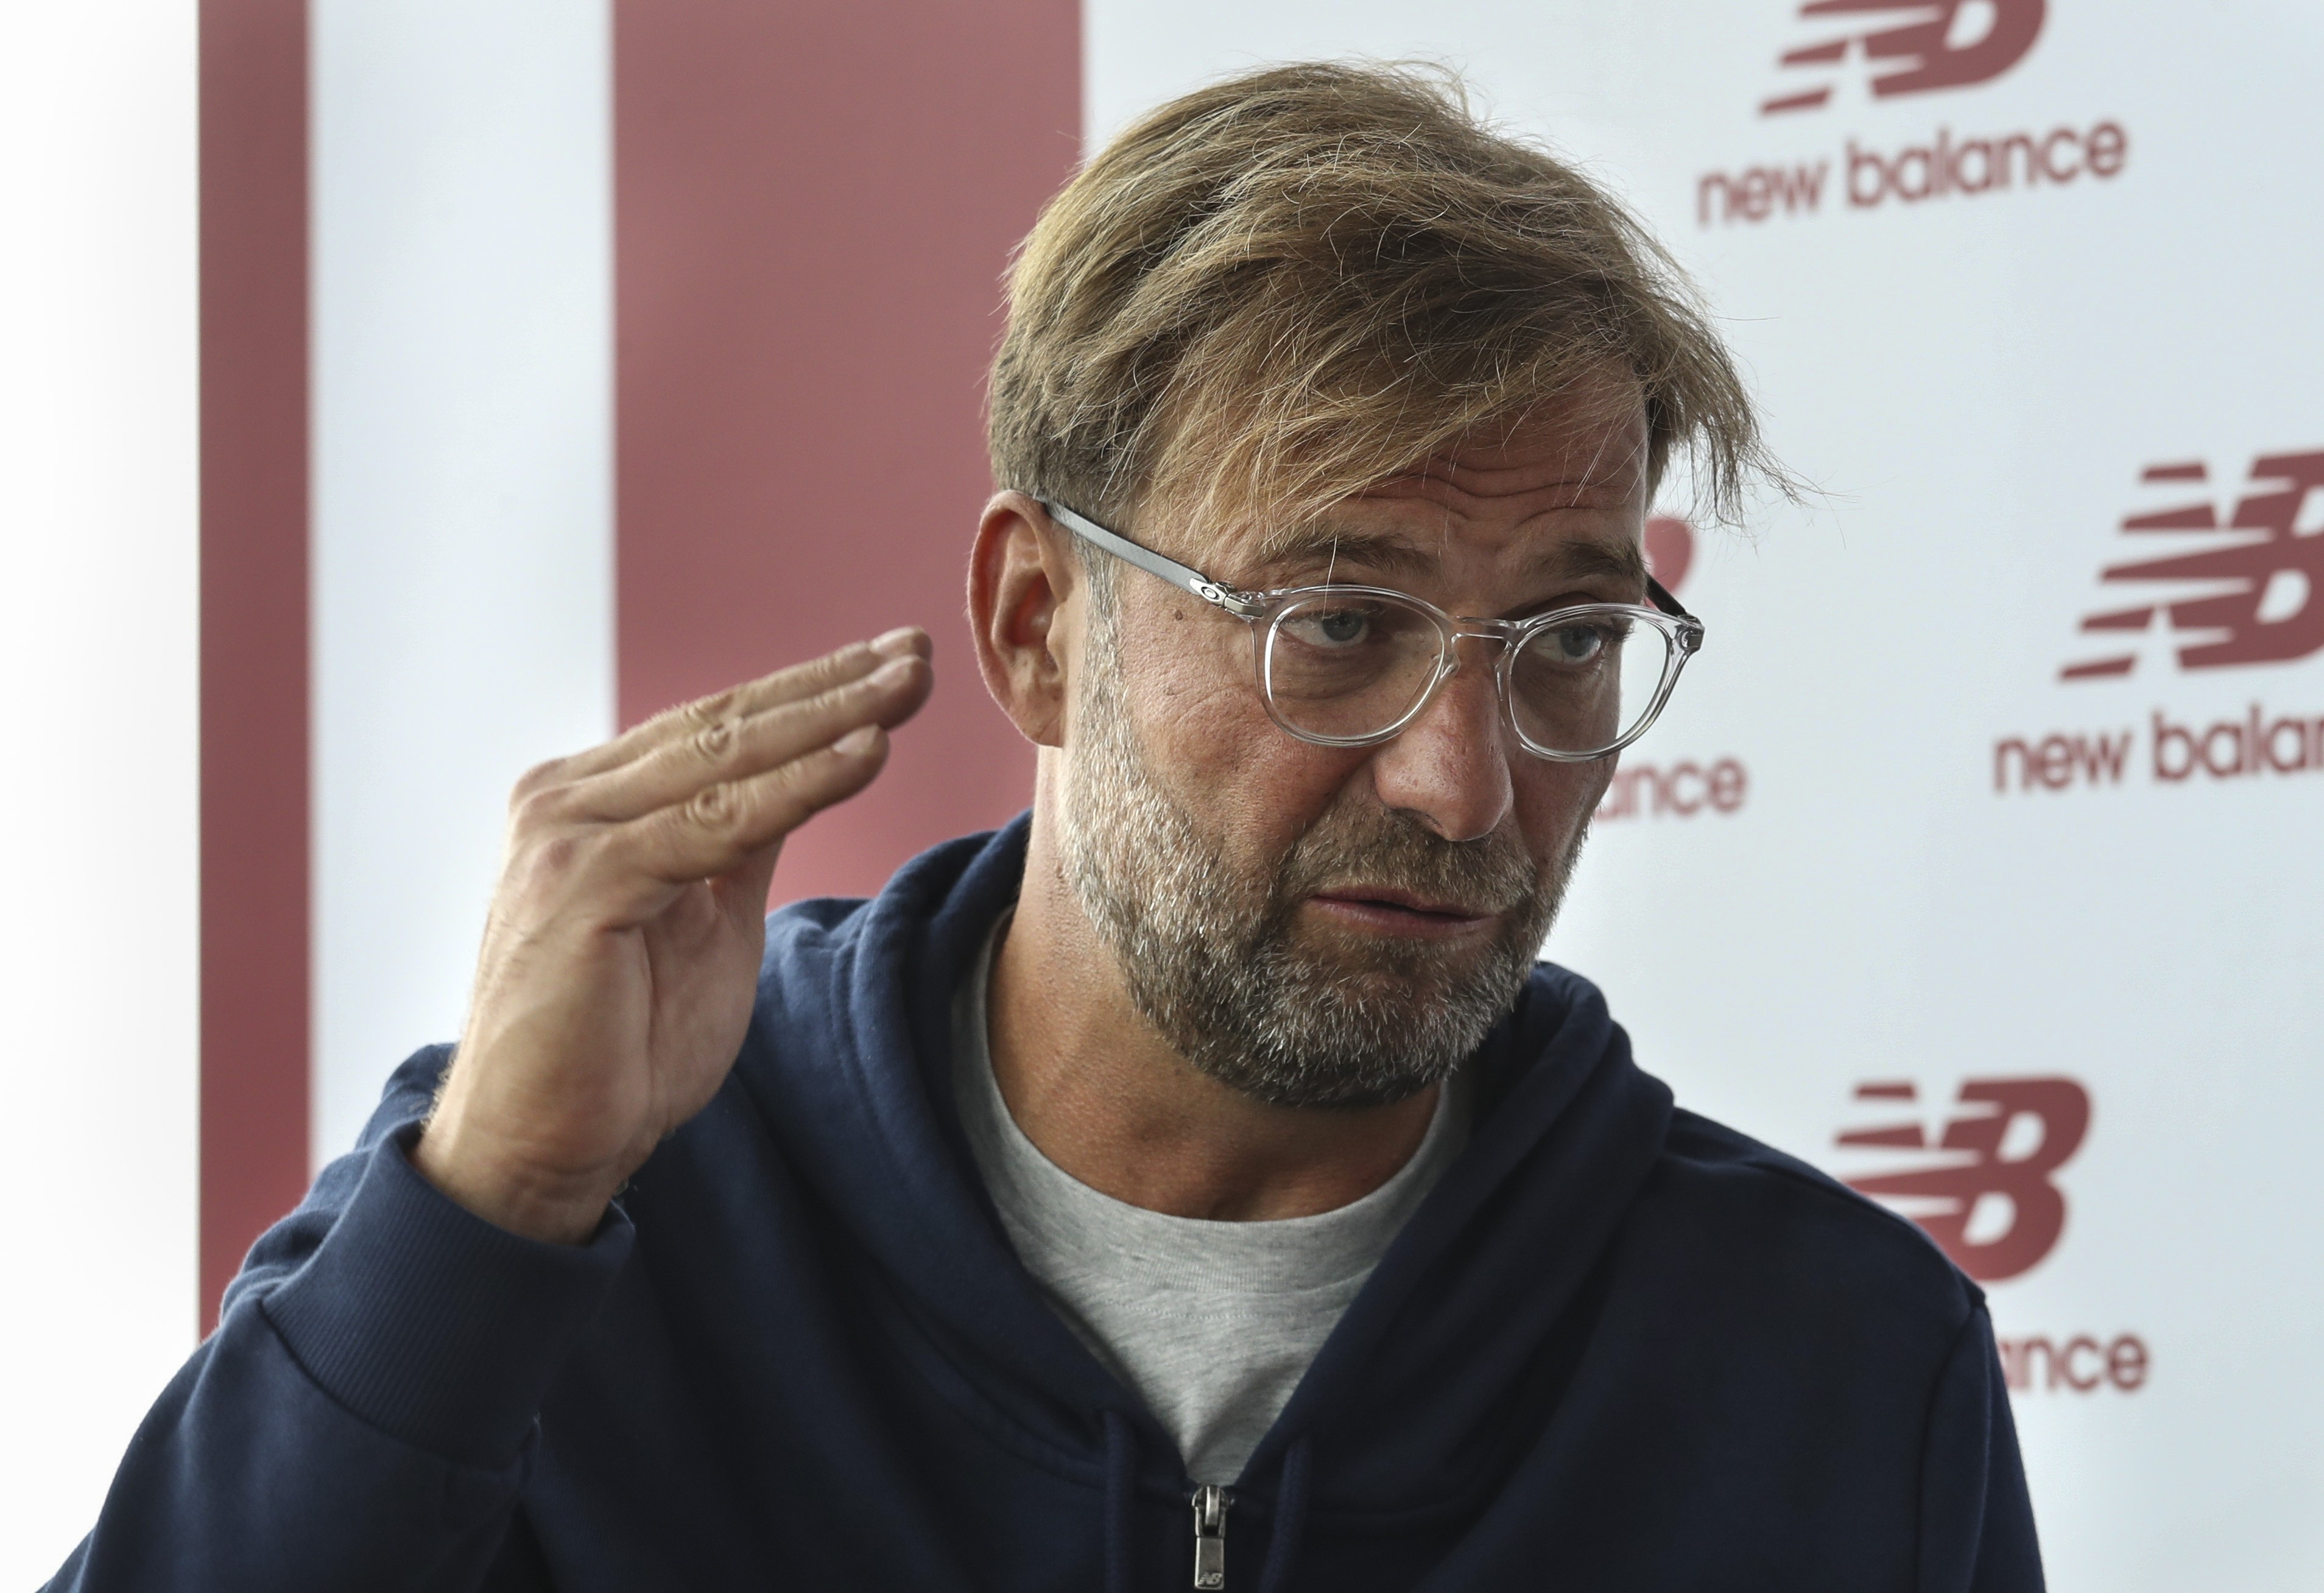 Jurgen Klopp would much rather be drilling his team in Liverpool than flying around the world to Hong Kong, but accepts it’s part of modern football. Photo: Nora Tam